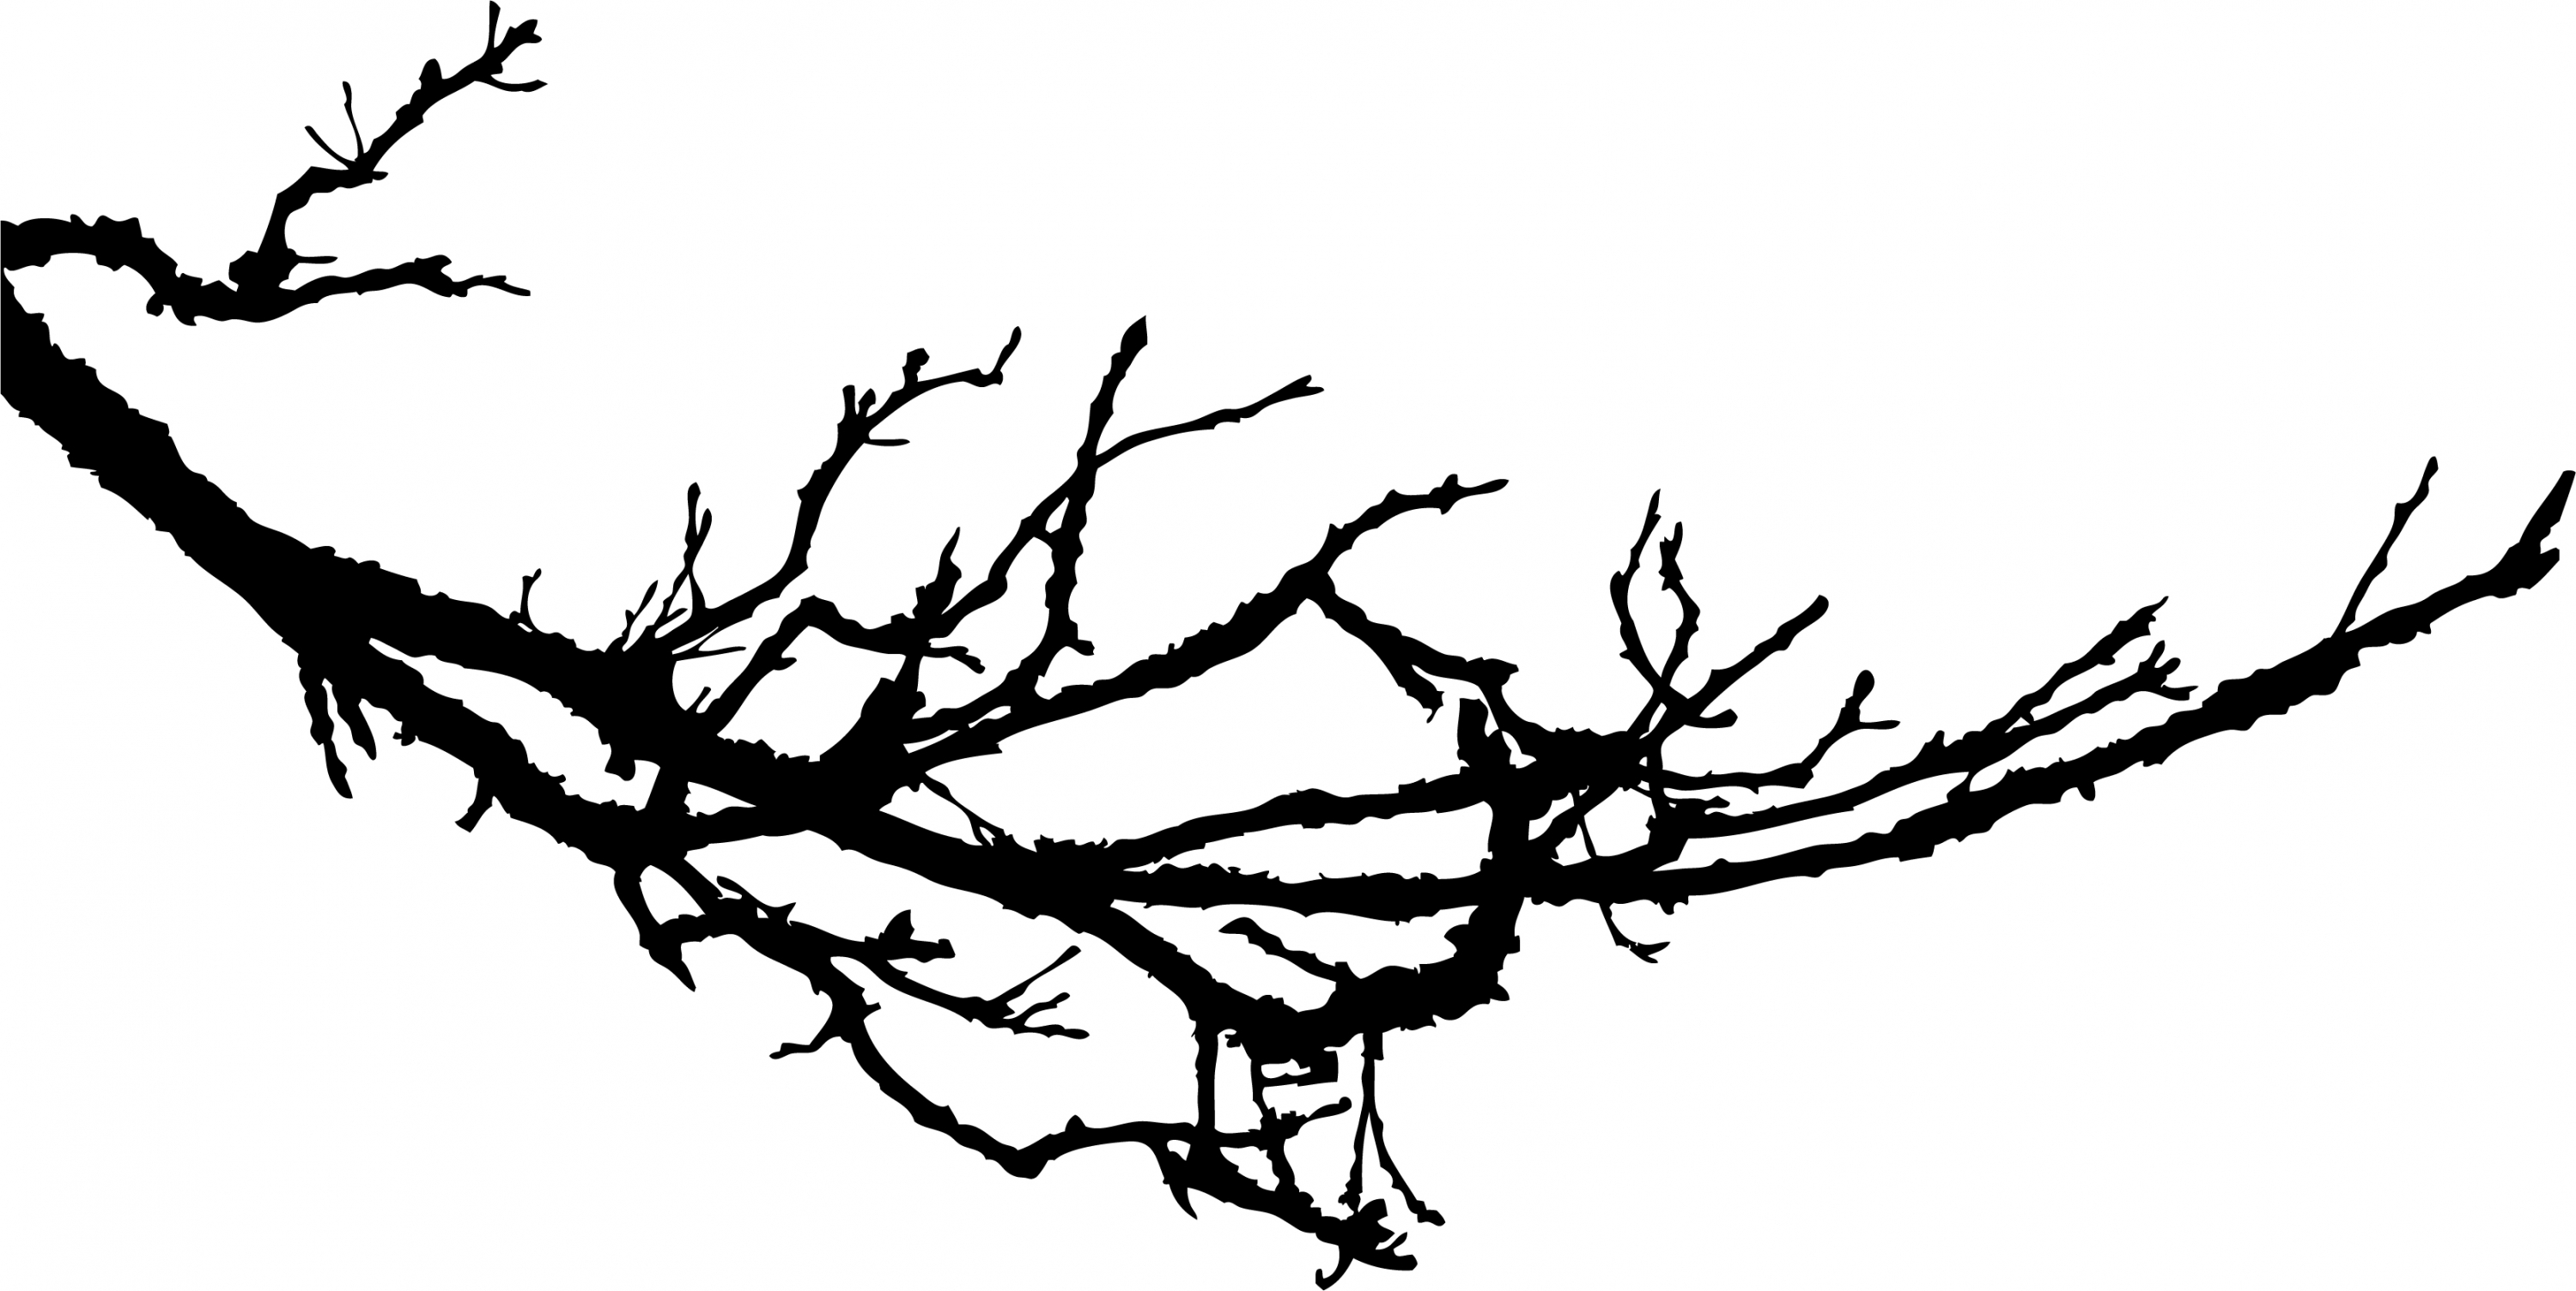 clipart of a tree with branches - photo #30